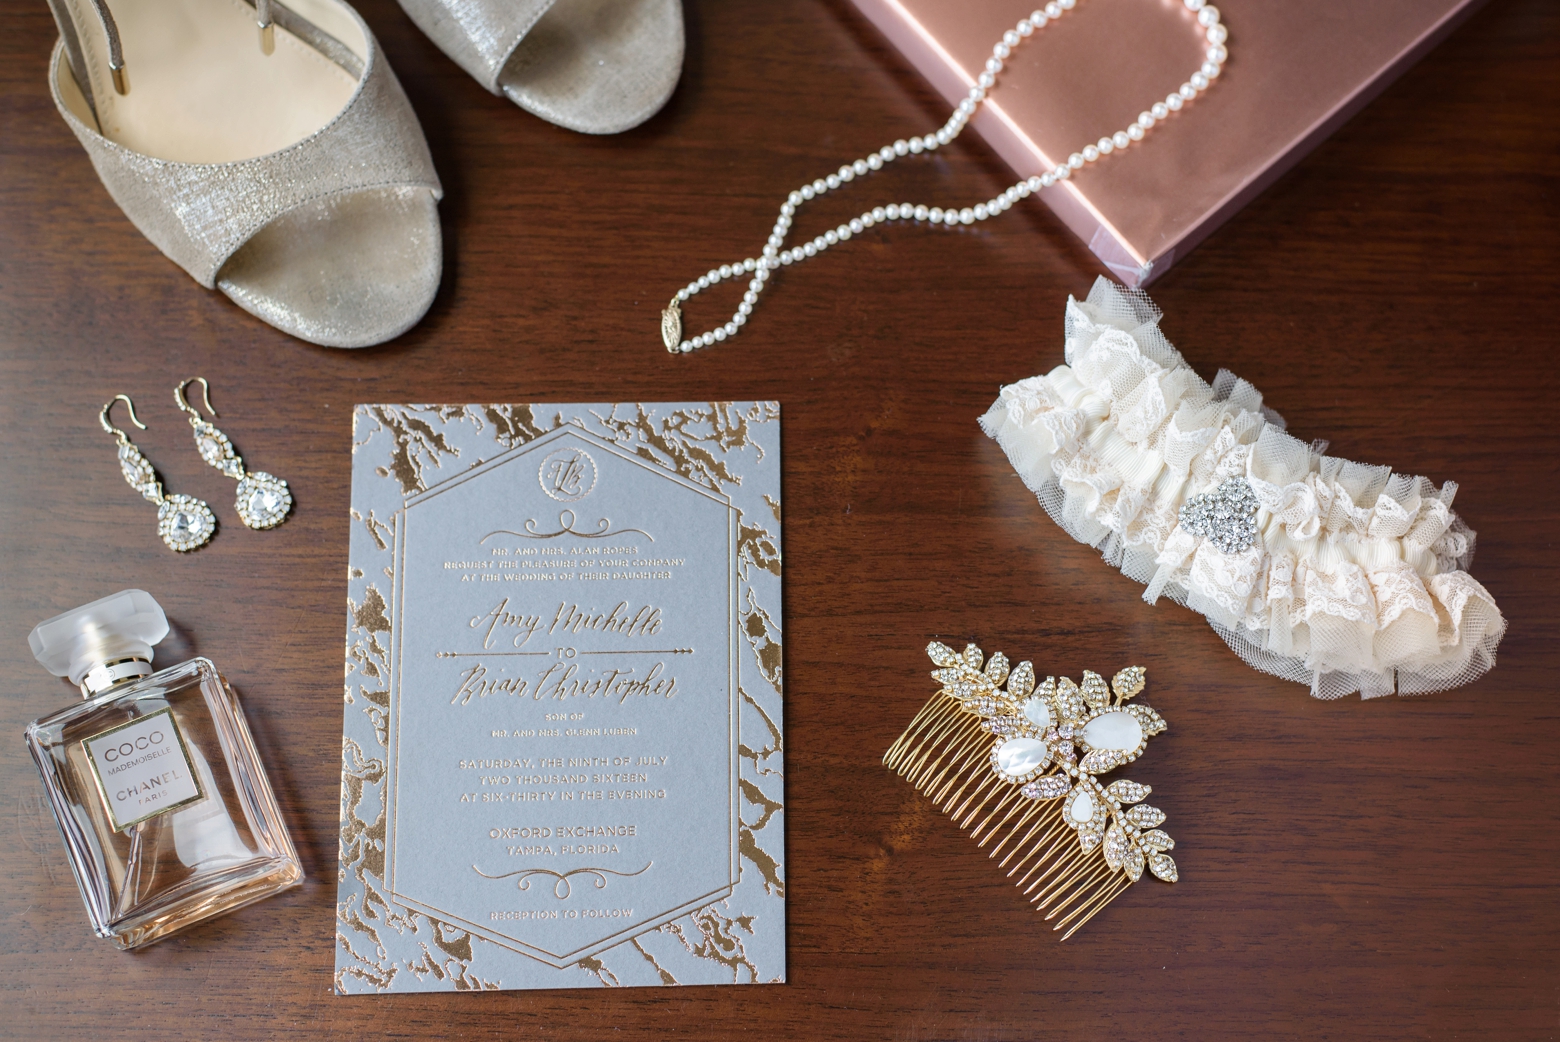 The Bridal details surrounding the wedding invitations on a wooden table